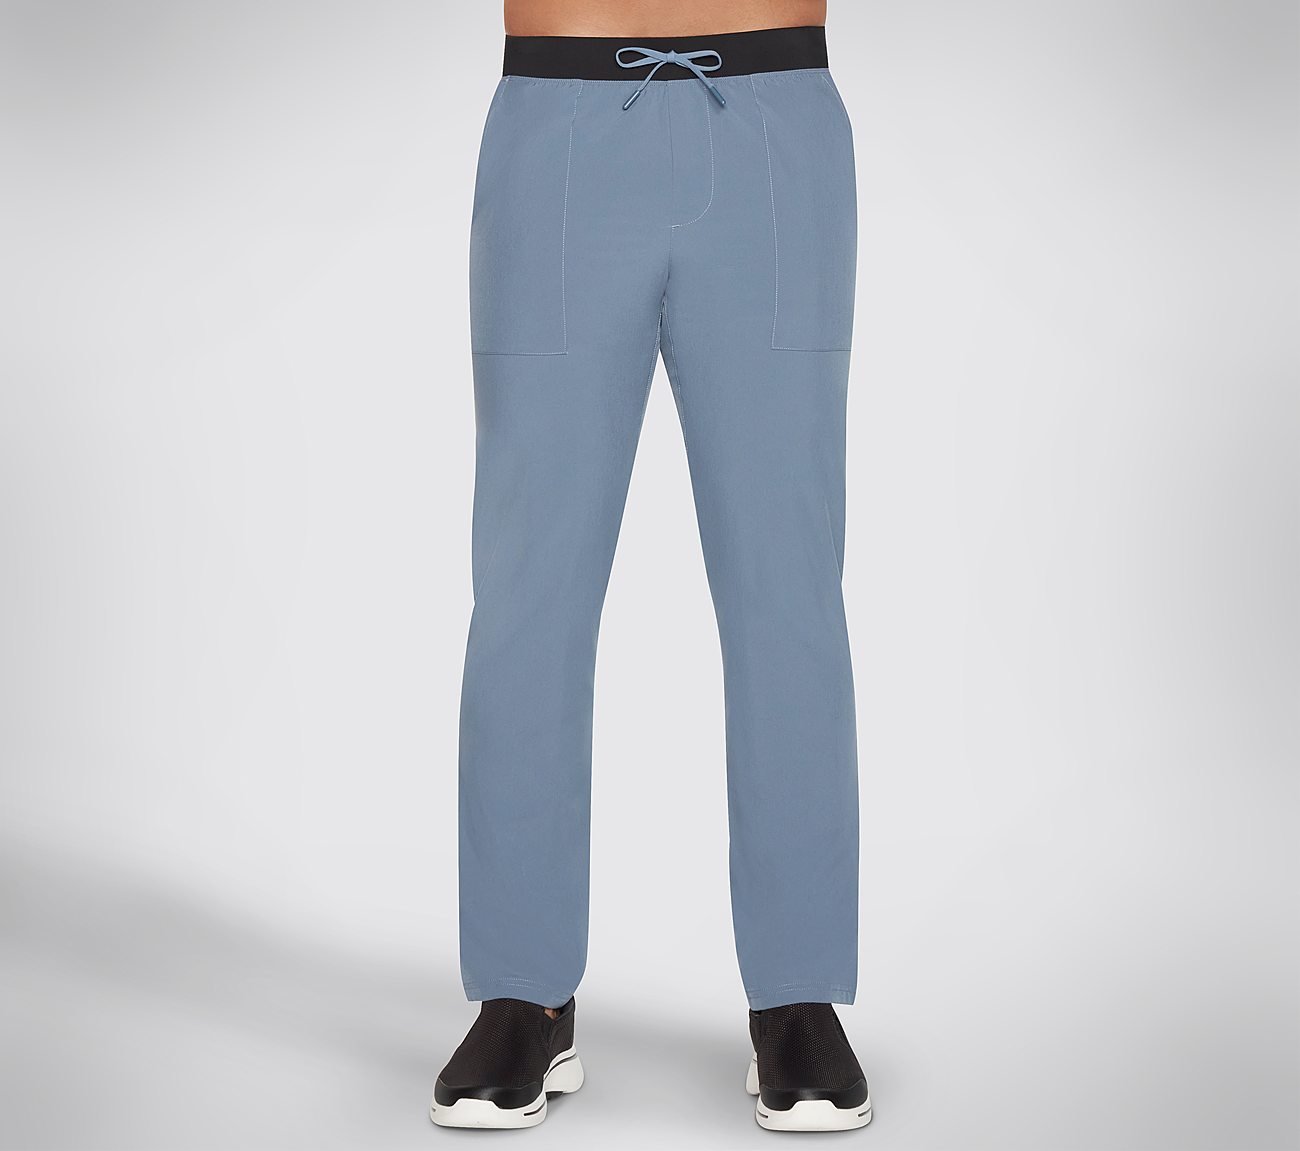 THE GOWALK PANT MOTION, BLUE/GREY Apparels Lateral View